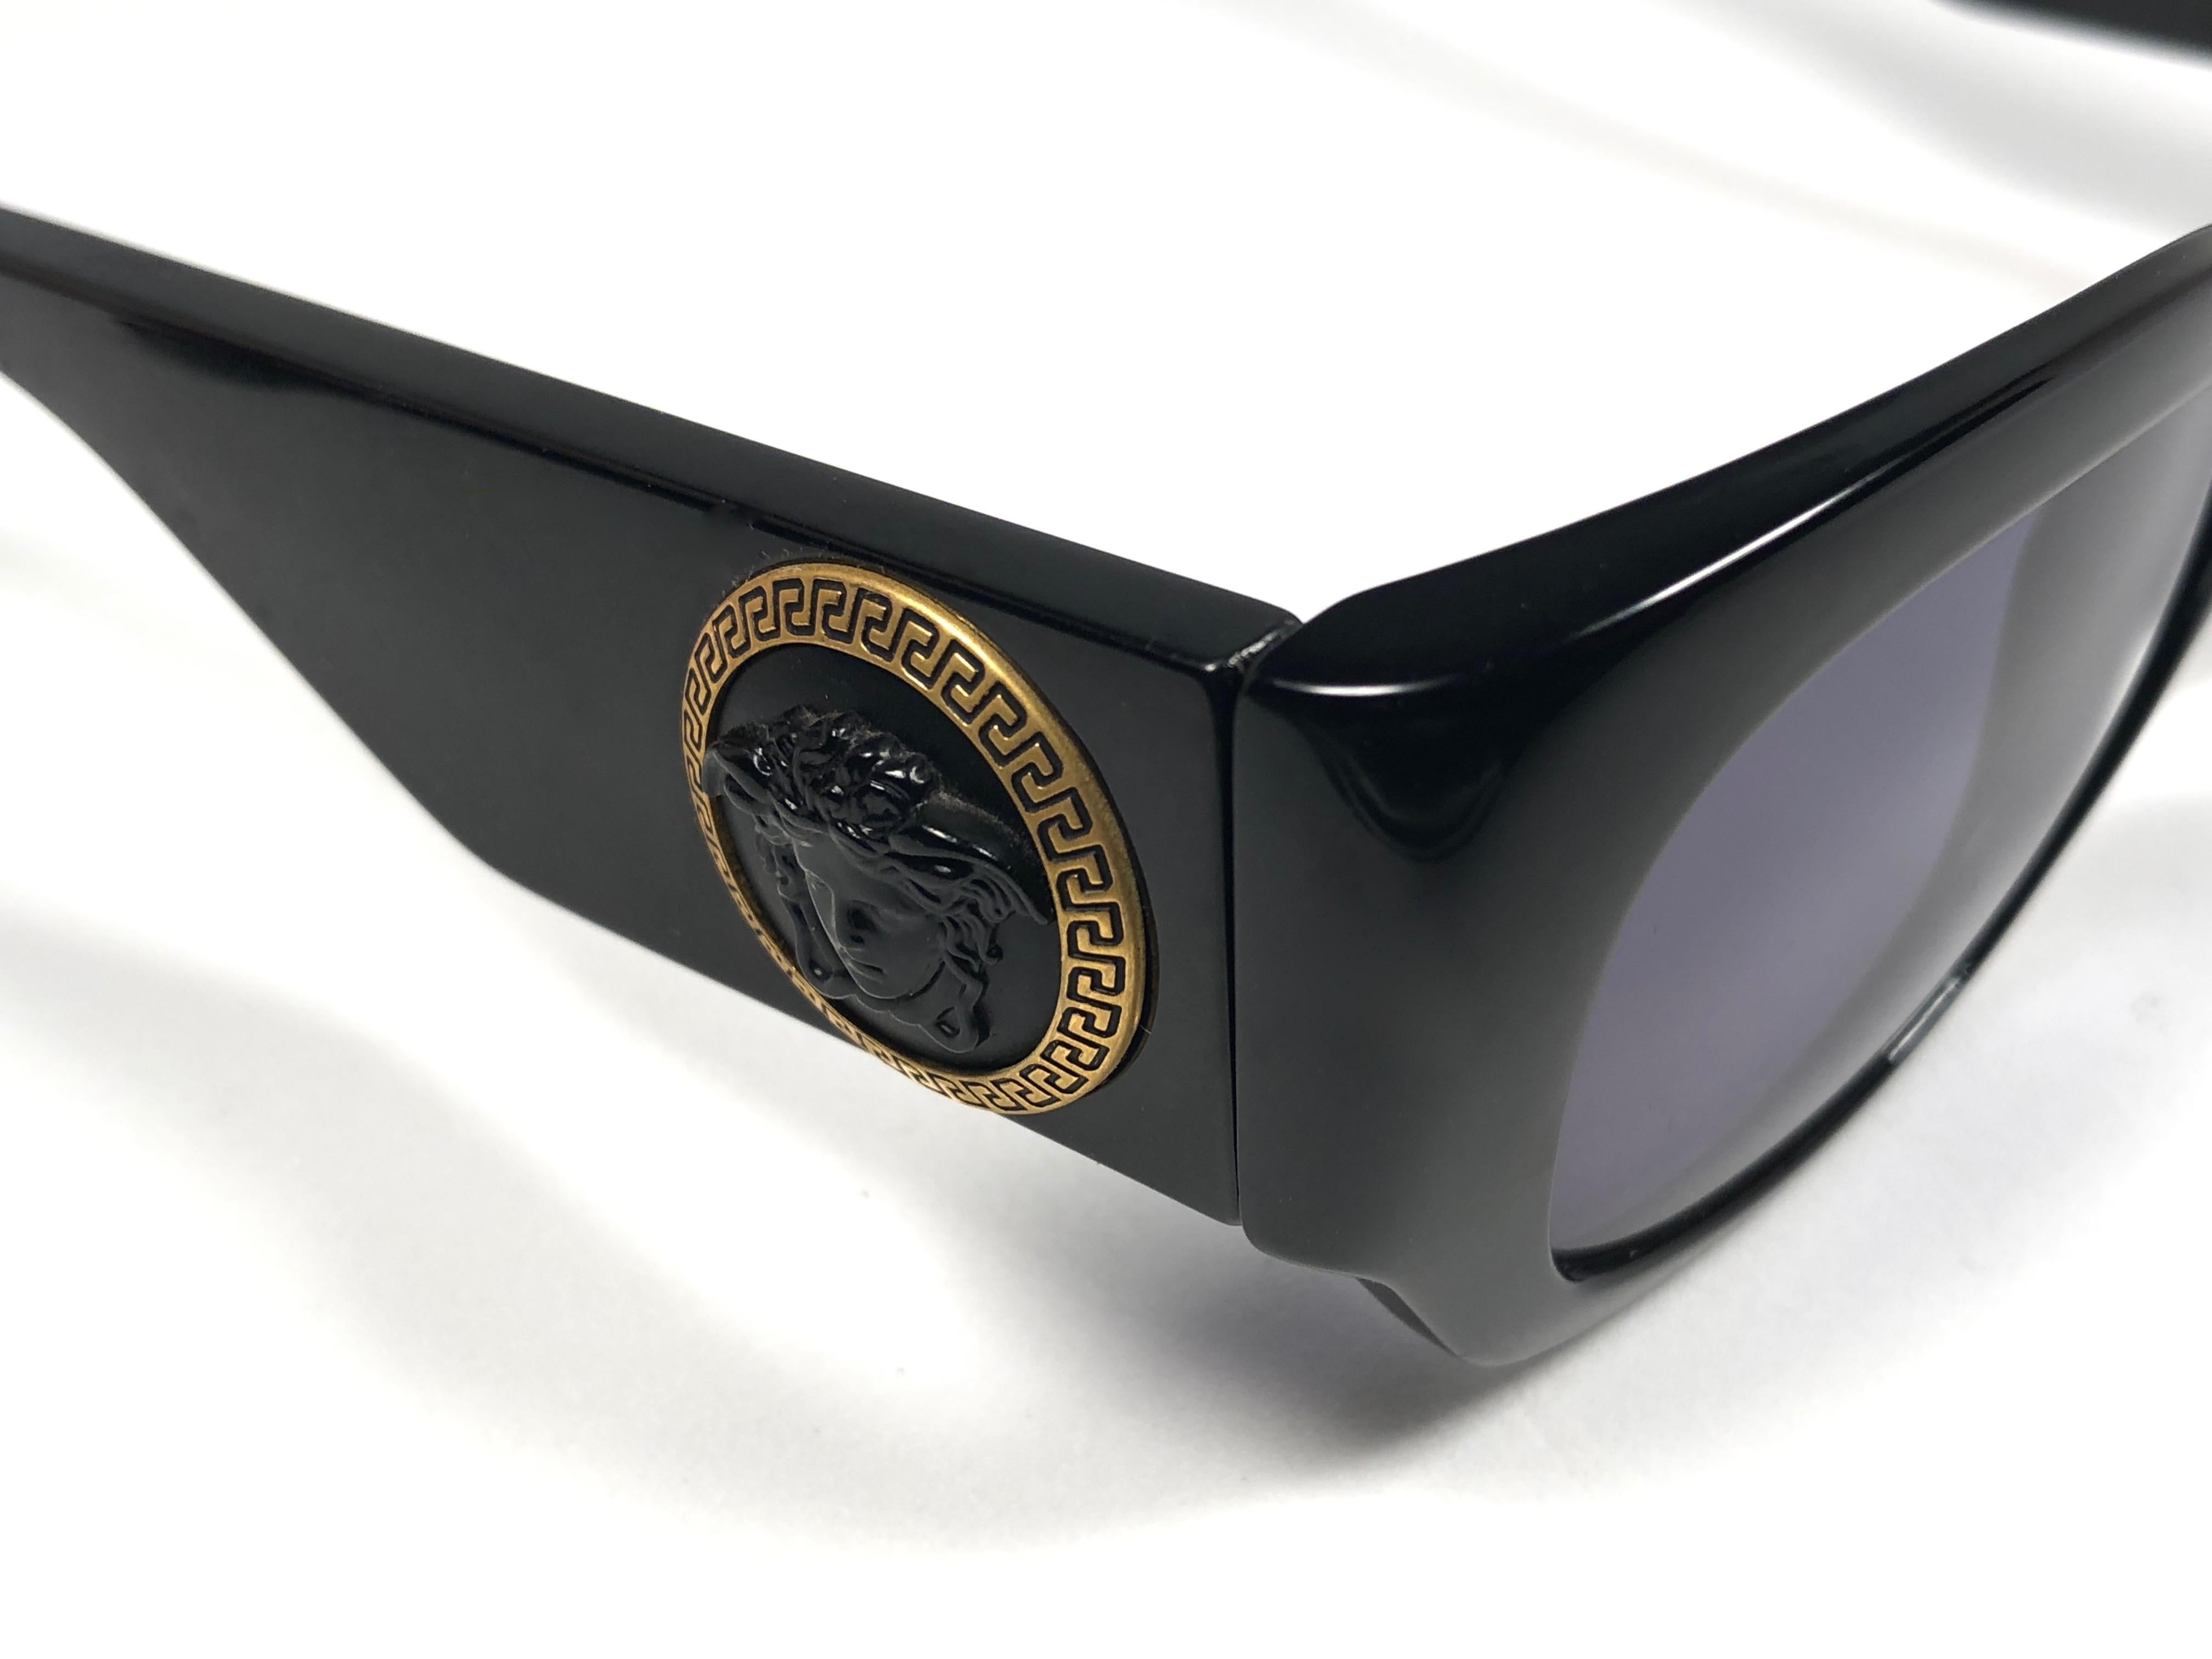 Vintage Gianni Versace 420 E Sleek Black Sunglasses 1990's Made in Italy For Sale 3